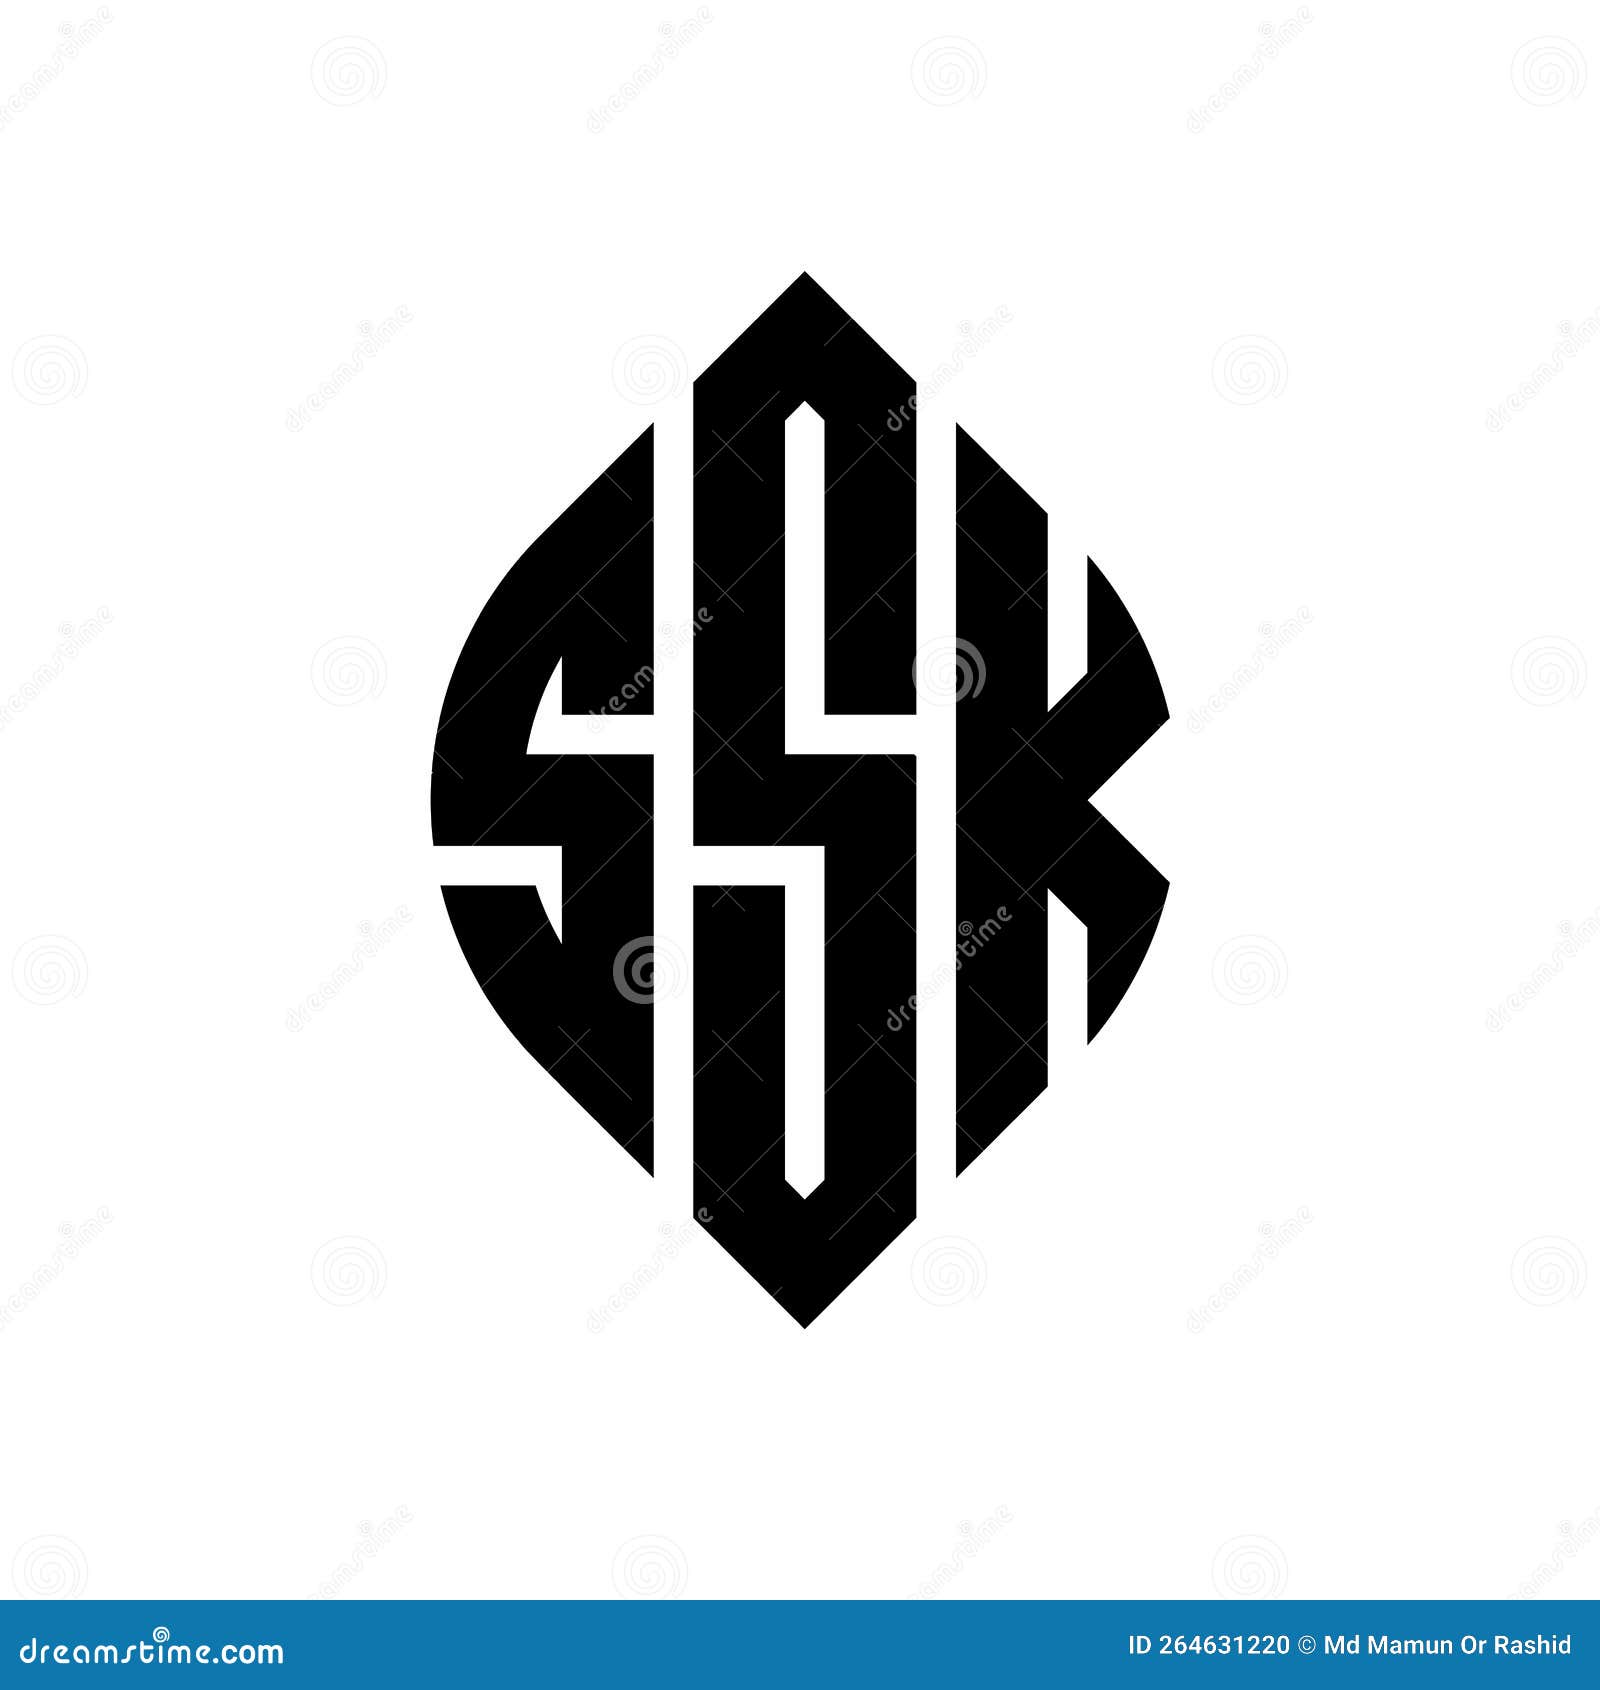 ssk circle letter logo  with circle and ellipse . ssk ellipse letters with typographic style. the three initials form a